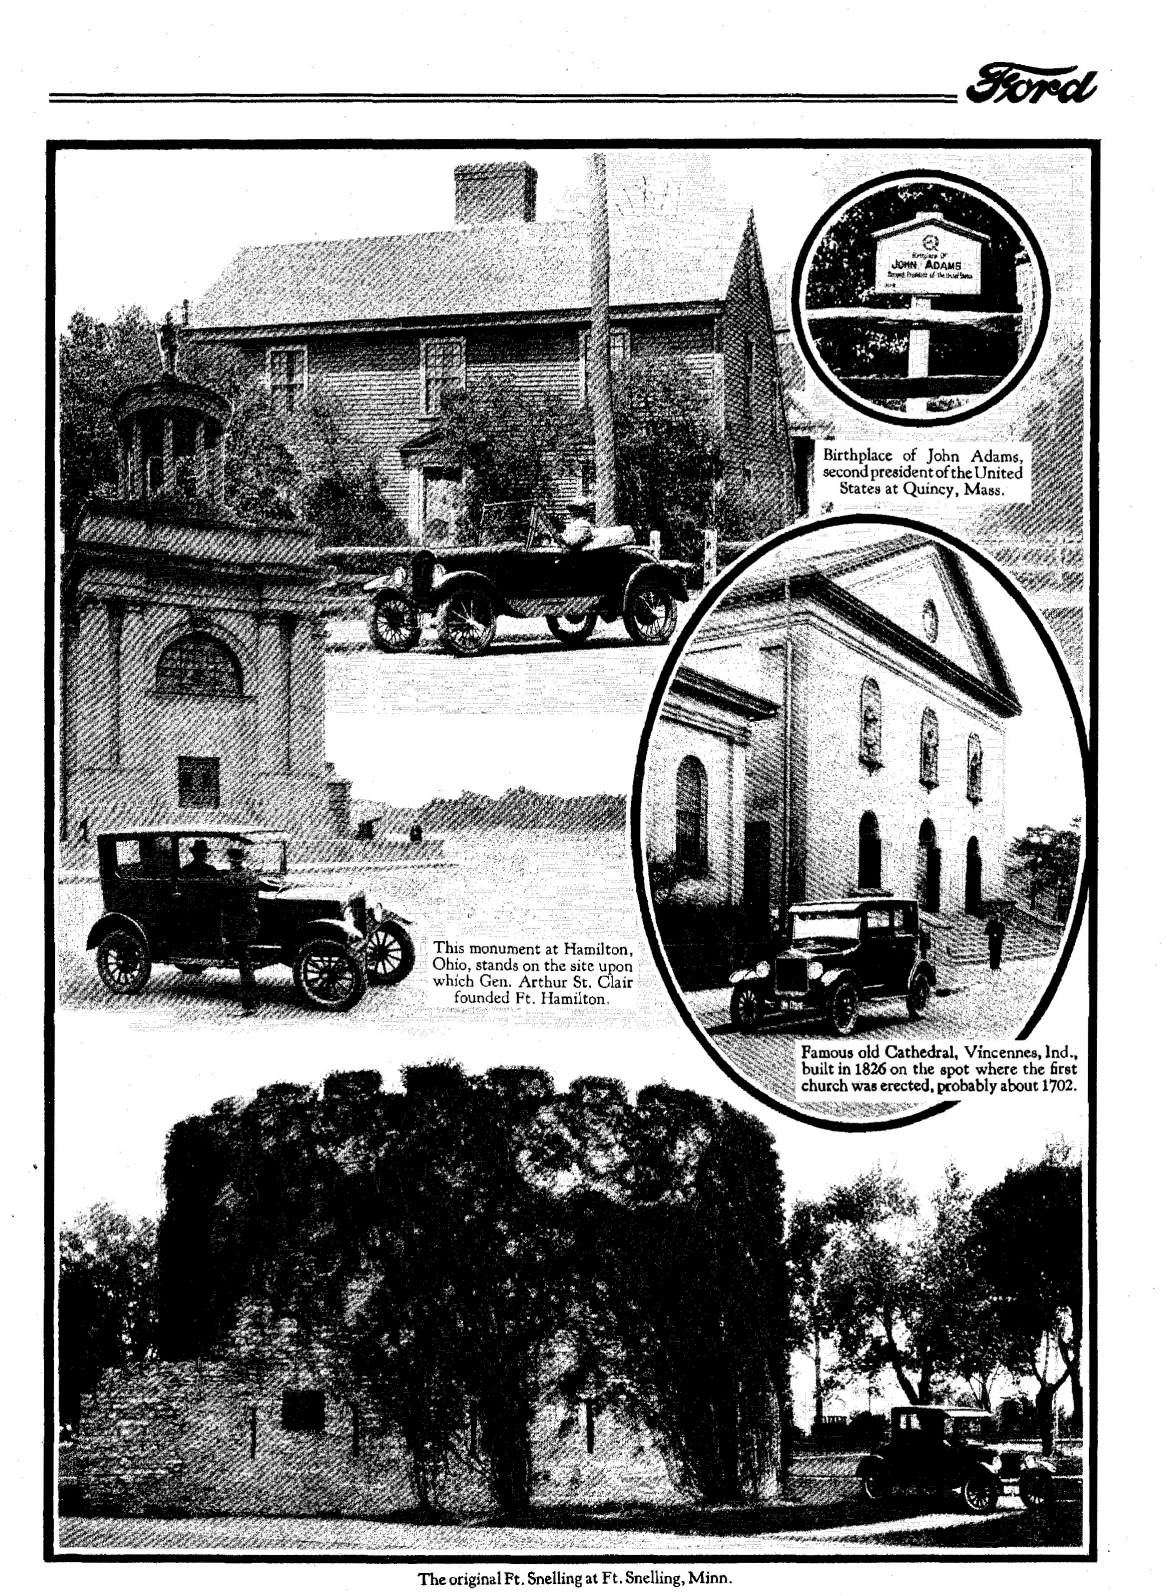 1926_Ford_Pictorial-03-3